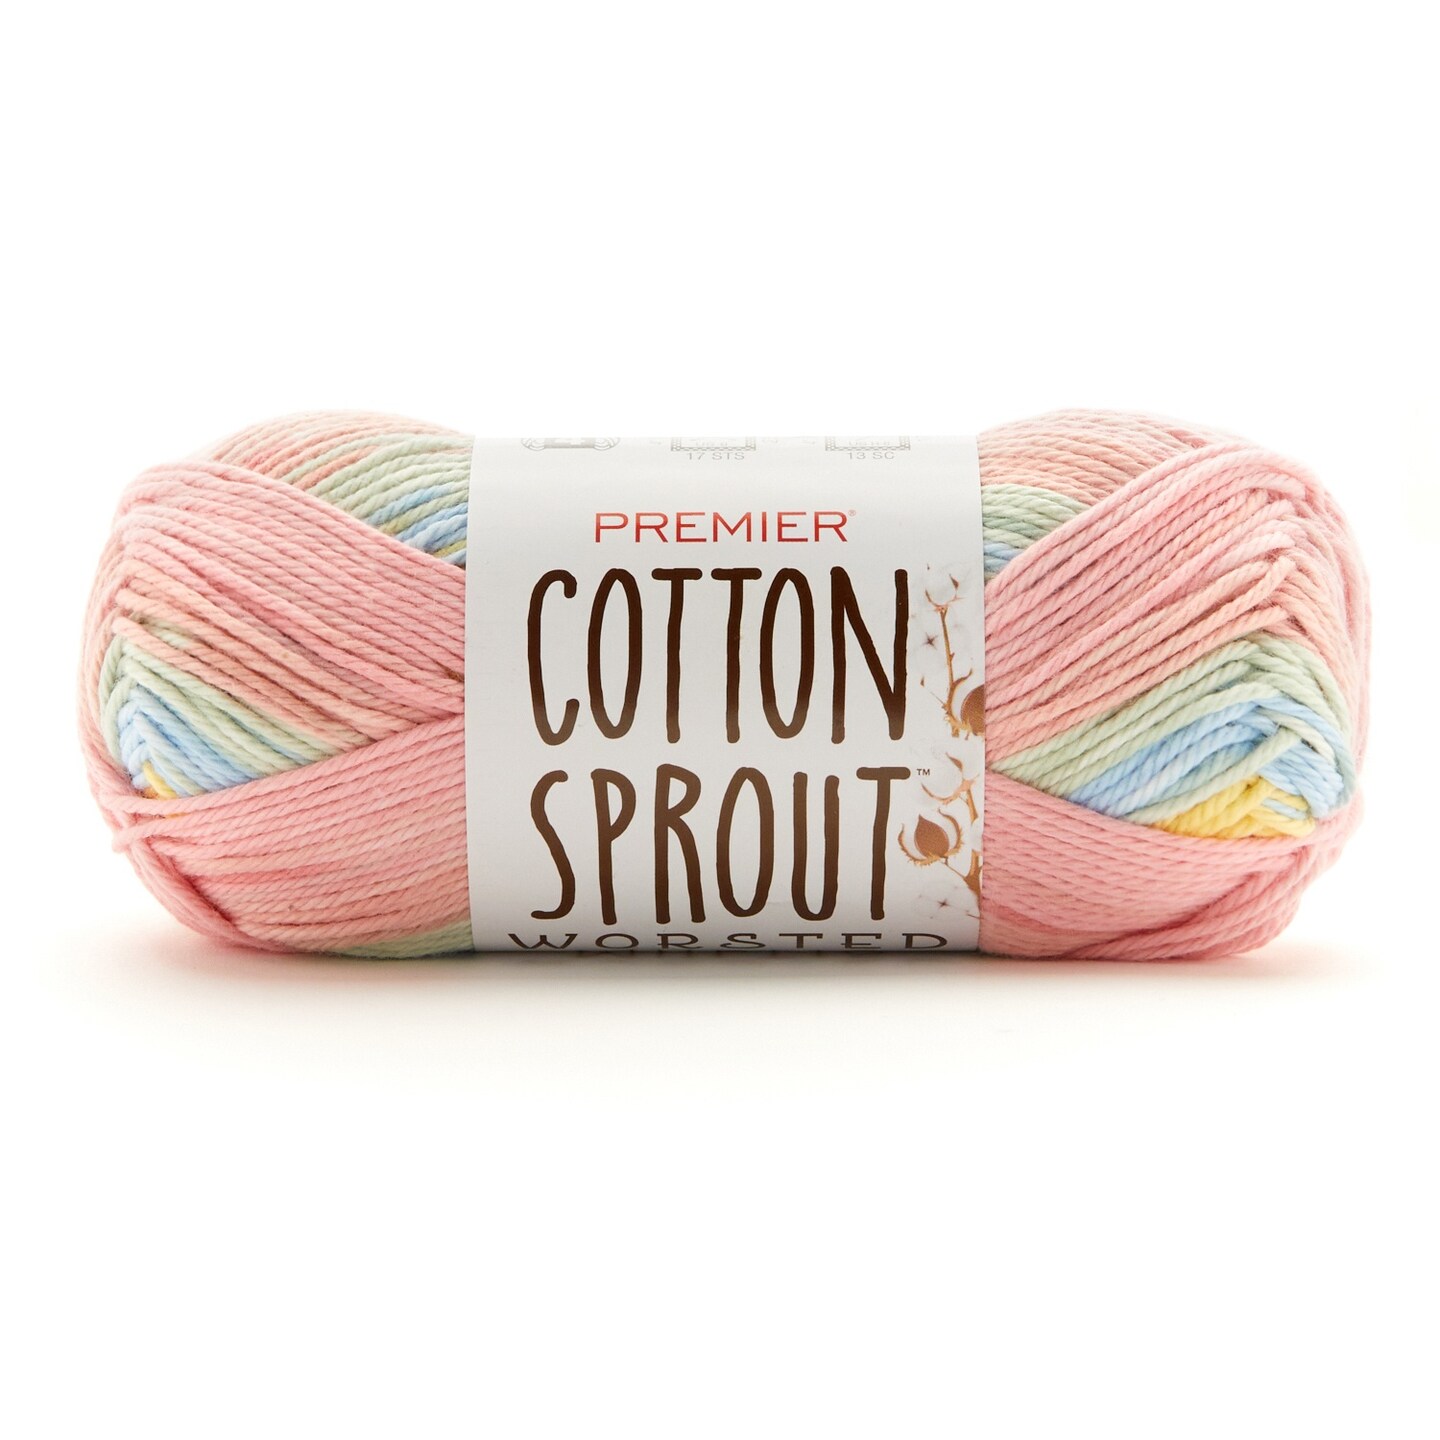 Premier Cotton Sprout Worsted Multi Yarn-Salt Water Taffy